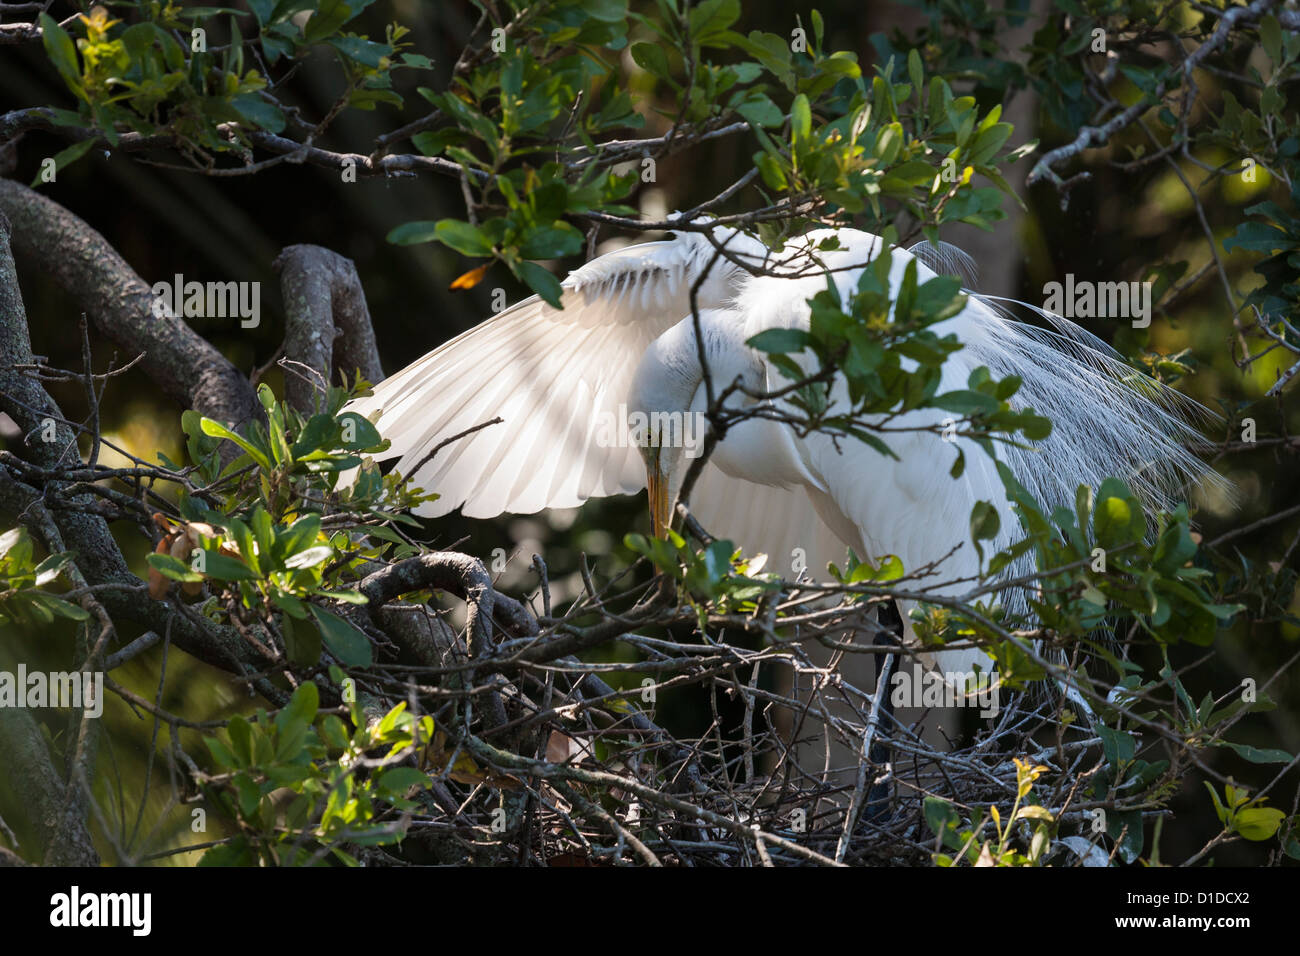 Great Egret (Ardea alba) white heron at nest in St. Augustine Alligator Farm Zoological Park rookery in Florida Stock Photo